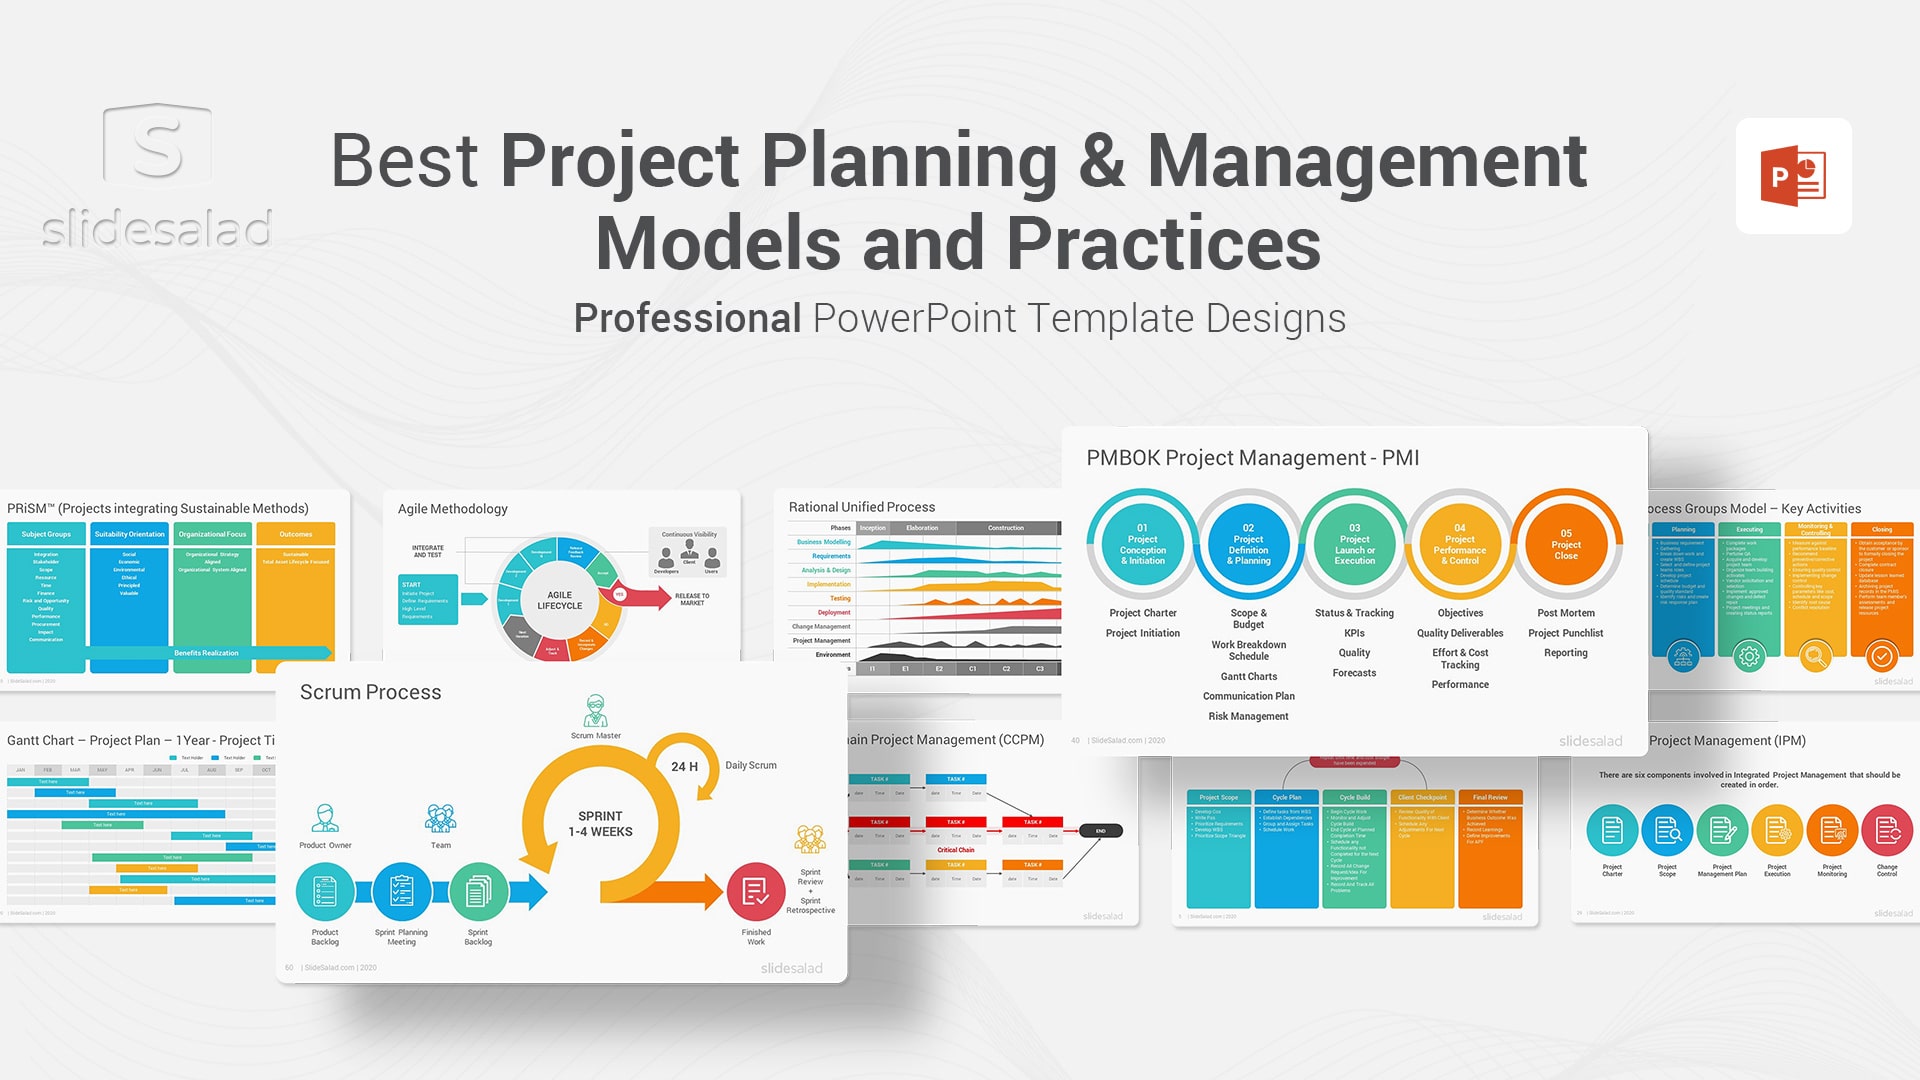 Best Project Planning and Management Models and Practices PowerPoint Templates